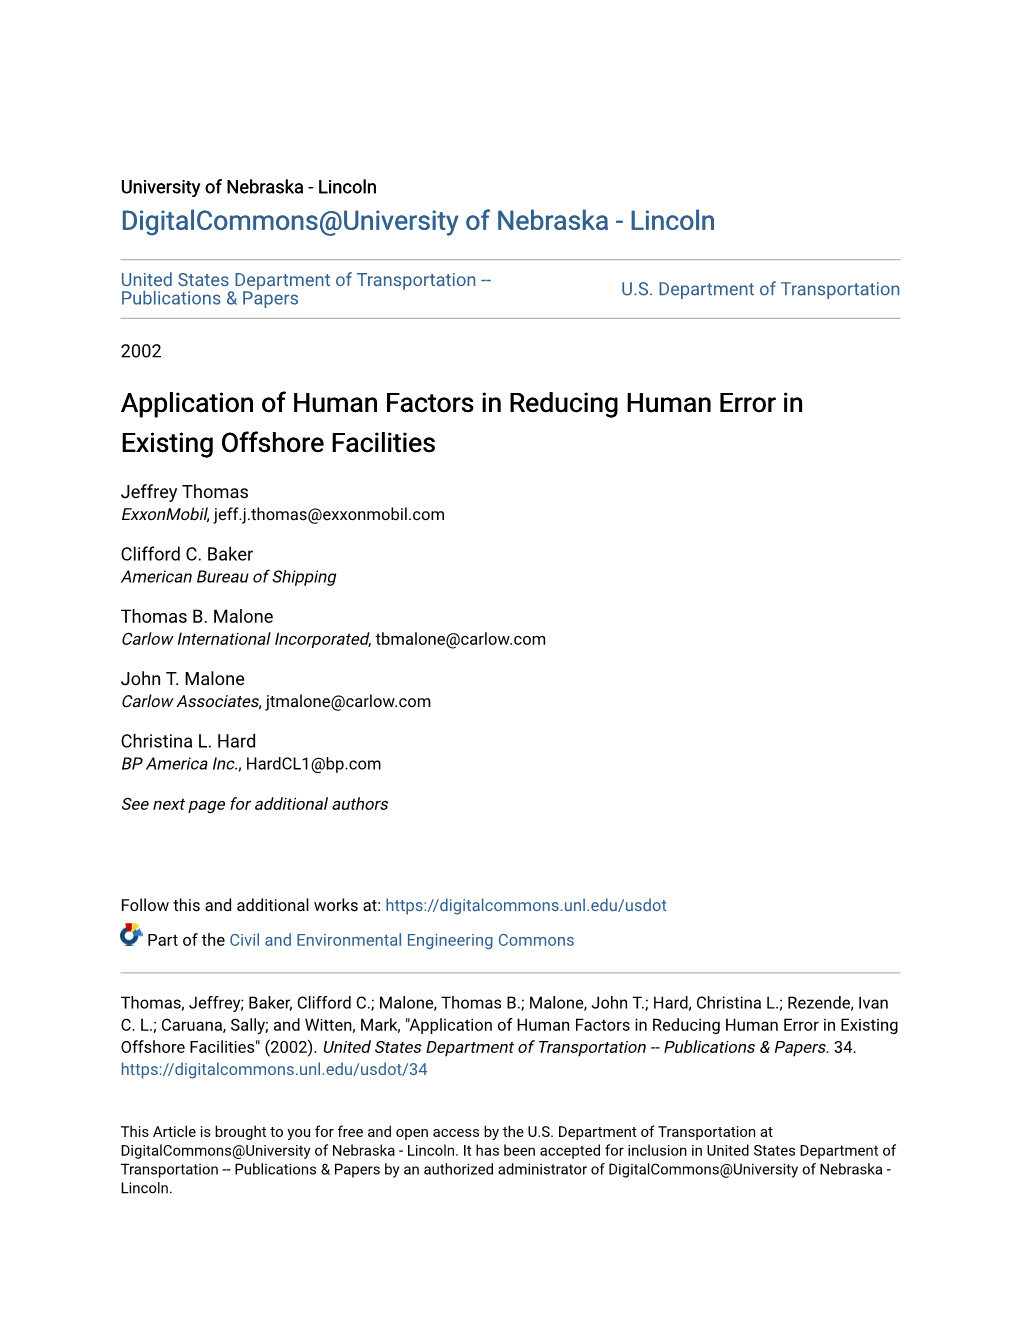 Application of Human Factors in Reducing Human Error in Existing Offshore Facilities